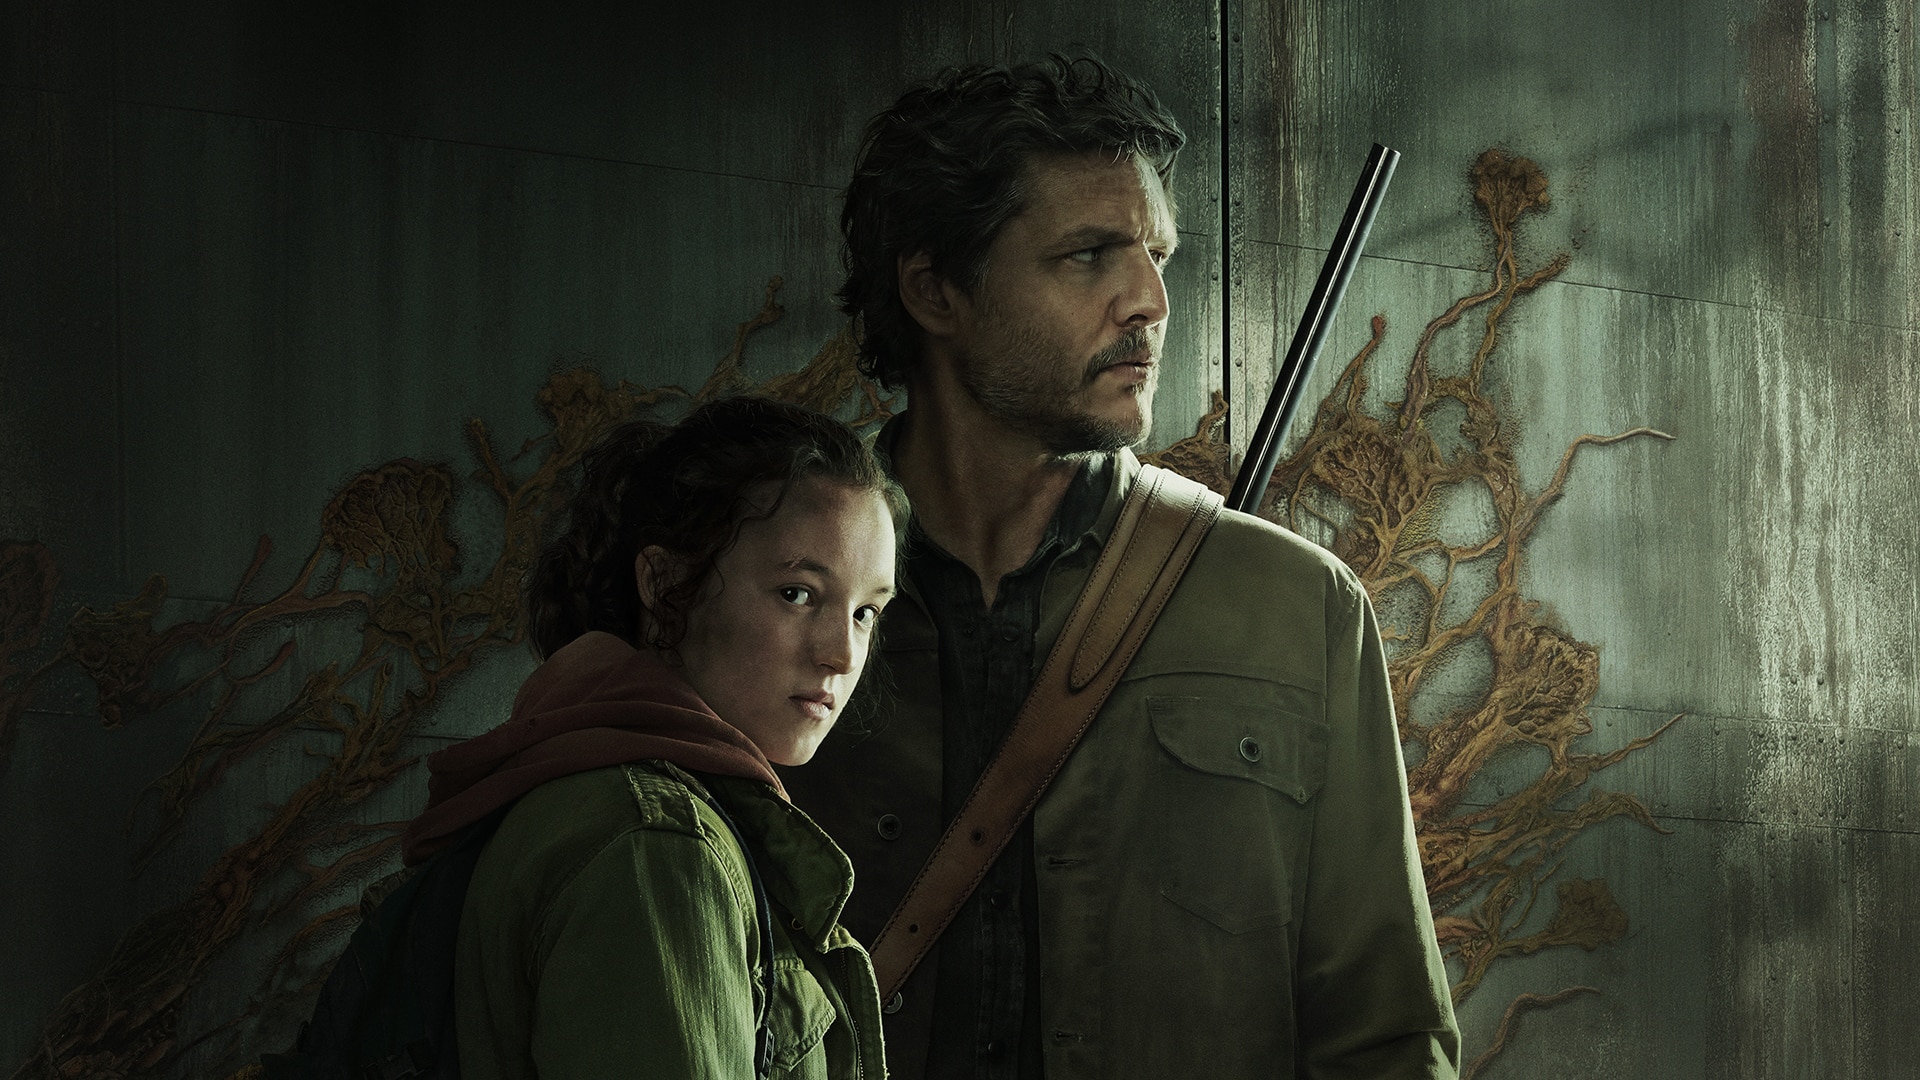 The Last of Us begins its journey on HBO